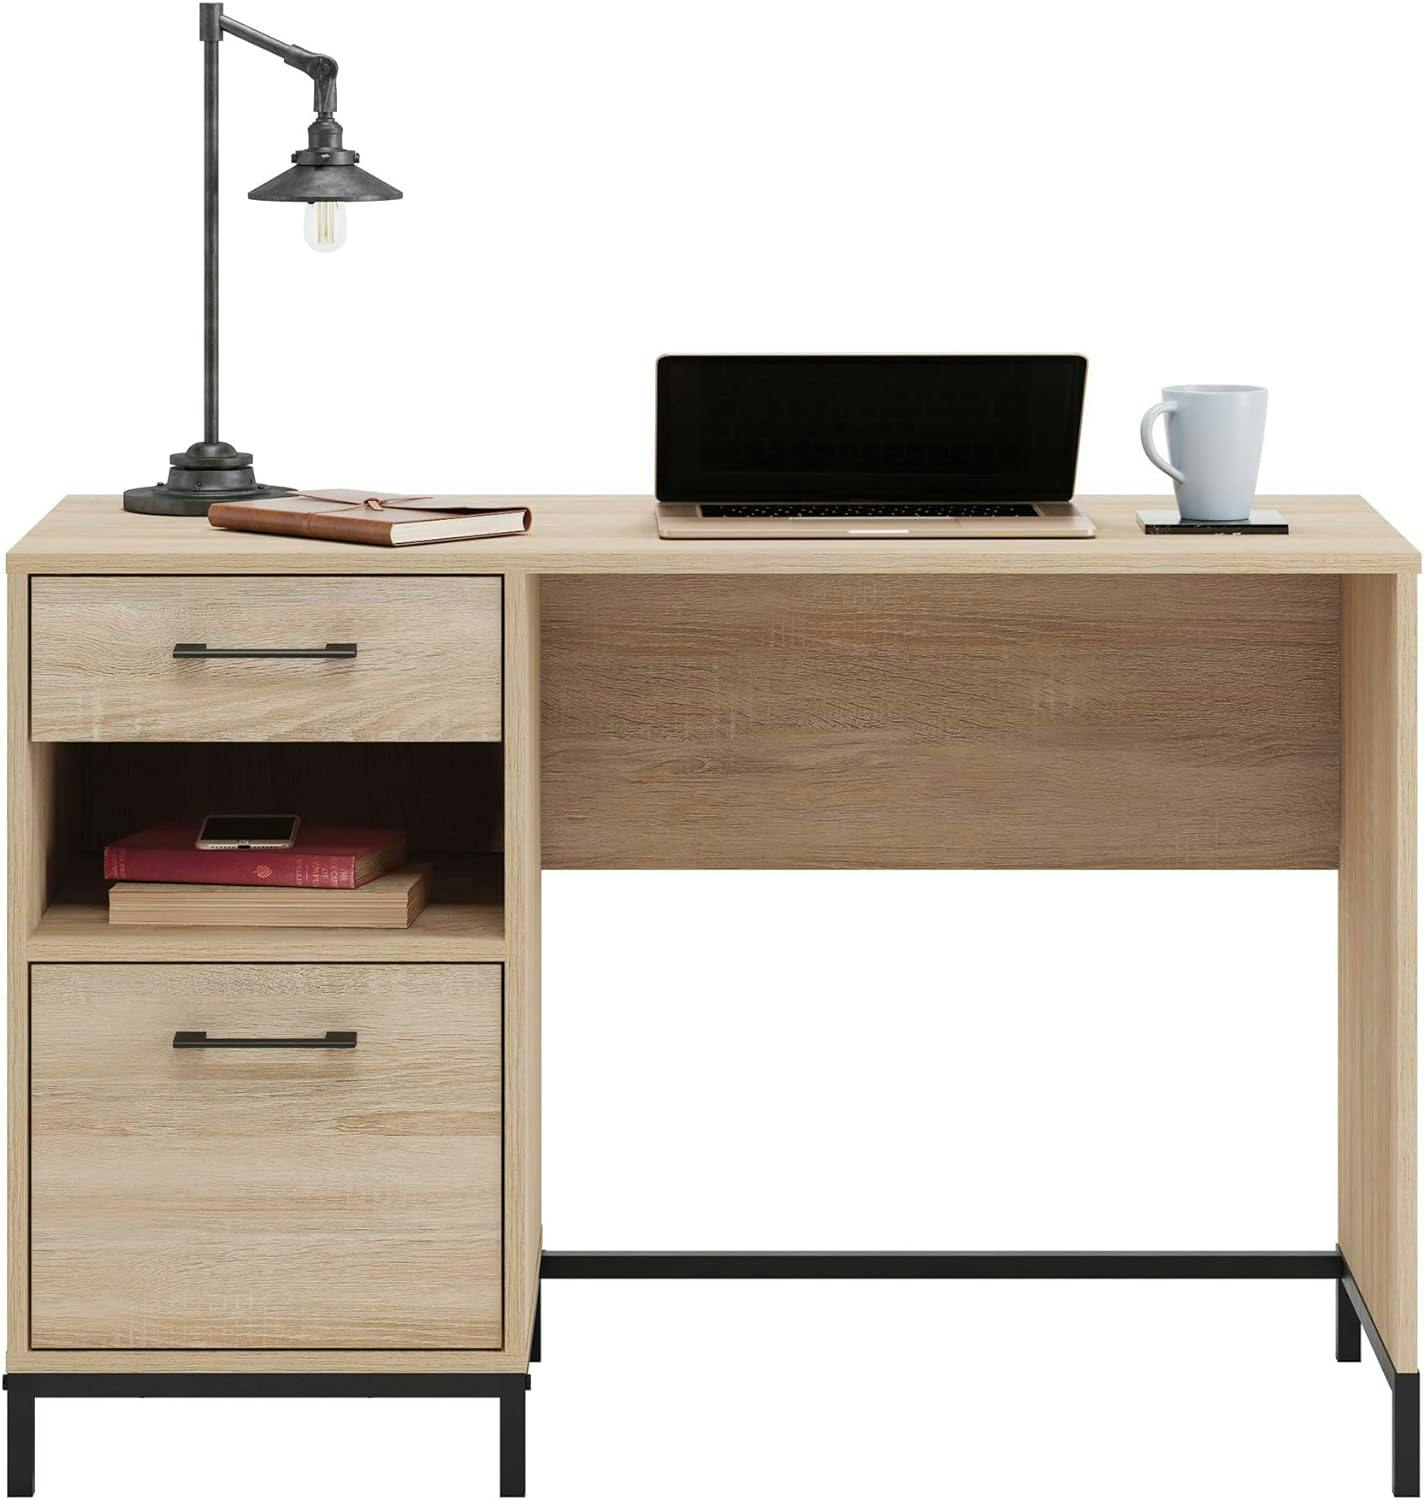 Charter Oak Finish Minimalist Home Office Desk with Drawers